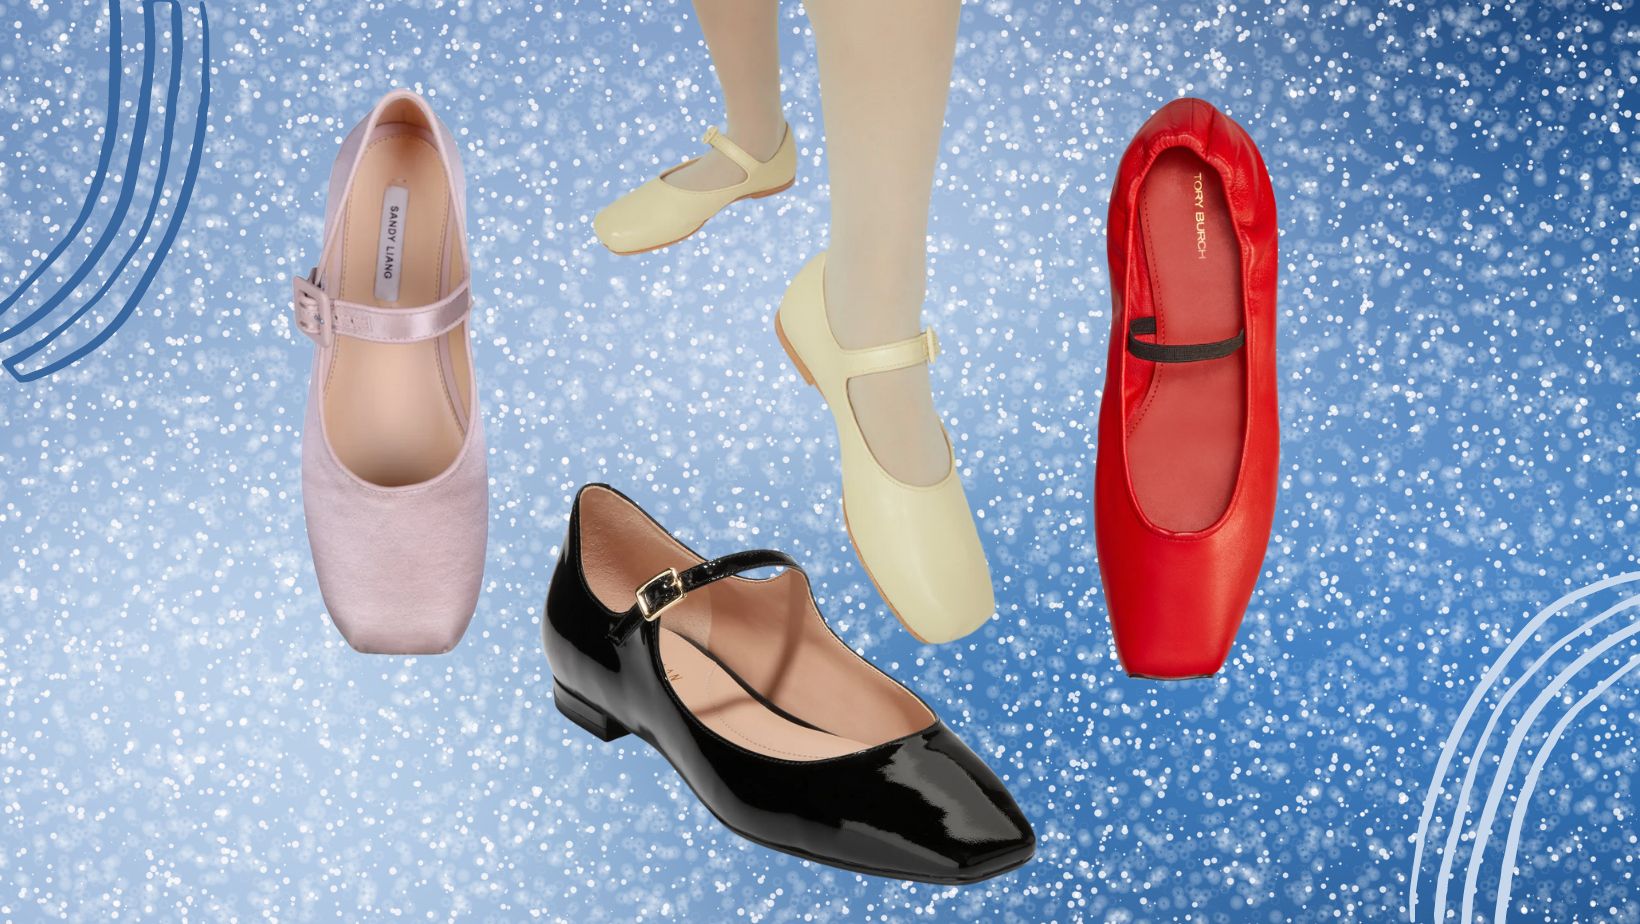 Mary Jane Ballet Flat Shoes For Women   HuffPost Life